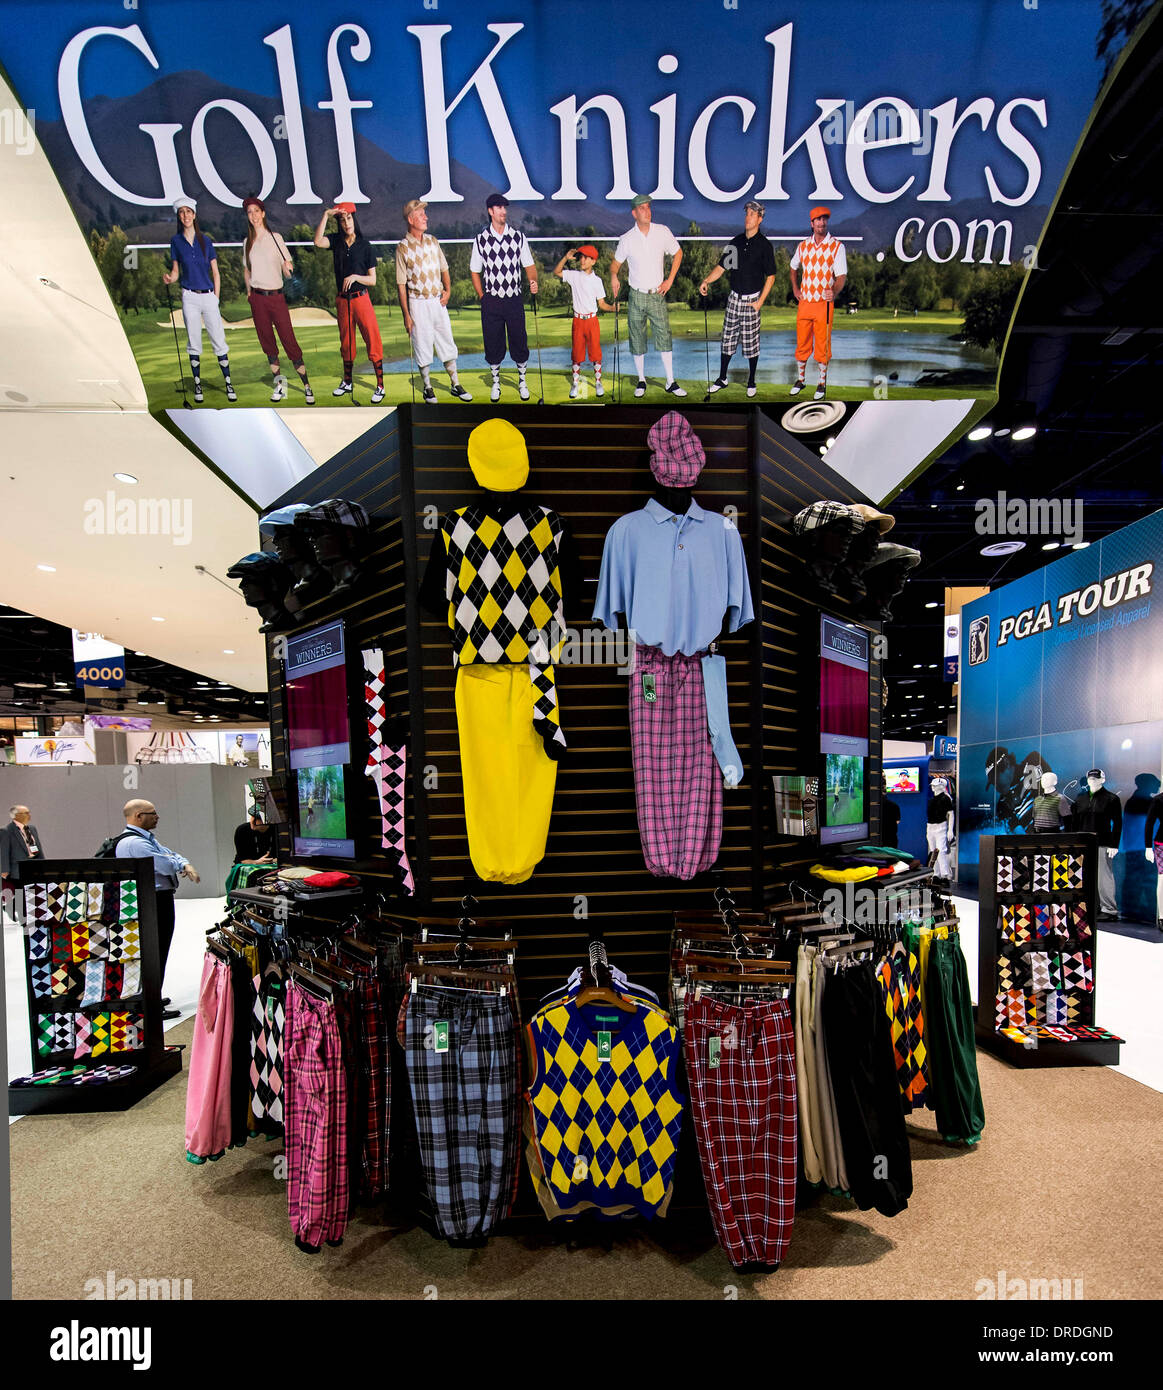 Orlando, Florida, USA. 23rd Jan, 2014. The Golf Knickers.com booth during  the PGA Merchandise Show at the Orange County Convention Center. With over  one million square feet of exhibit space and 41,000